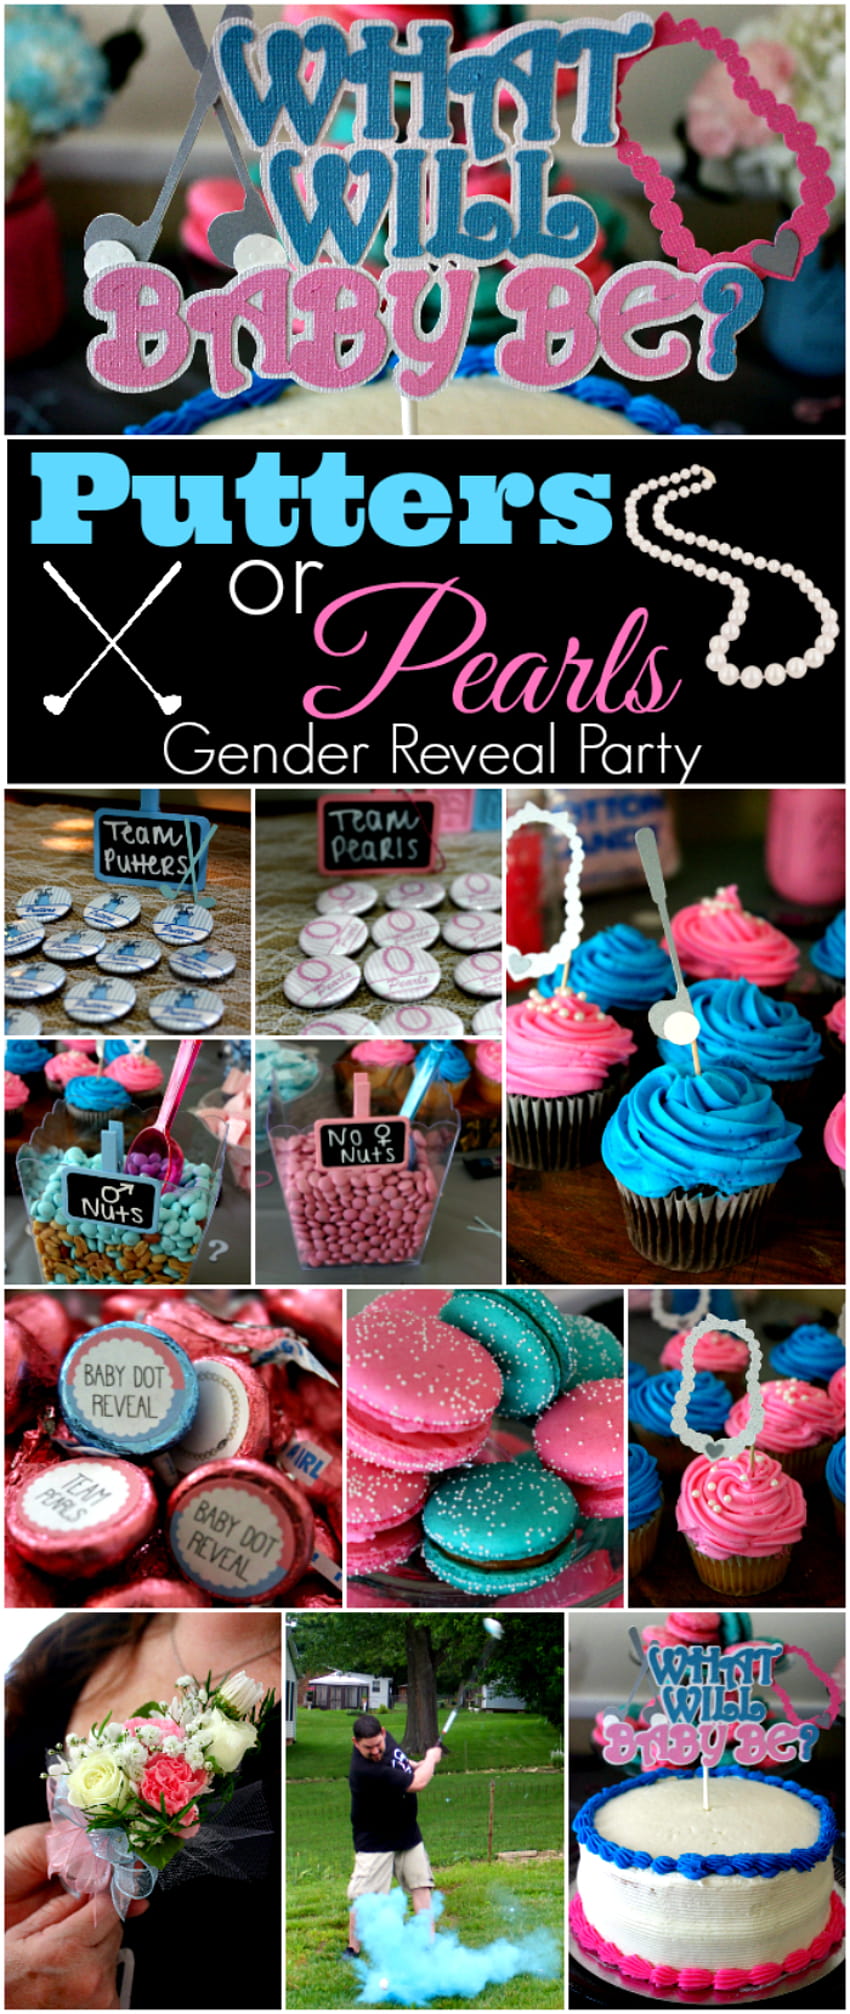 Putters or Pearls Gender Reveal Party HD phone wallpaper